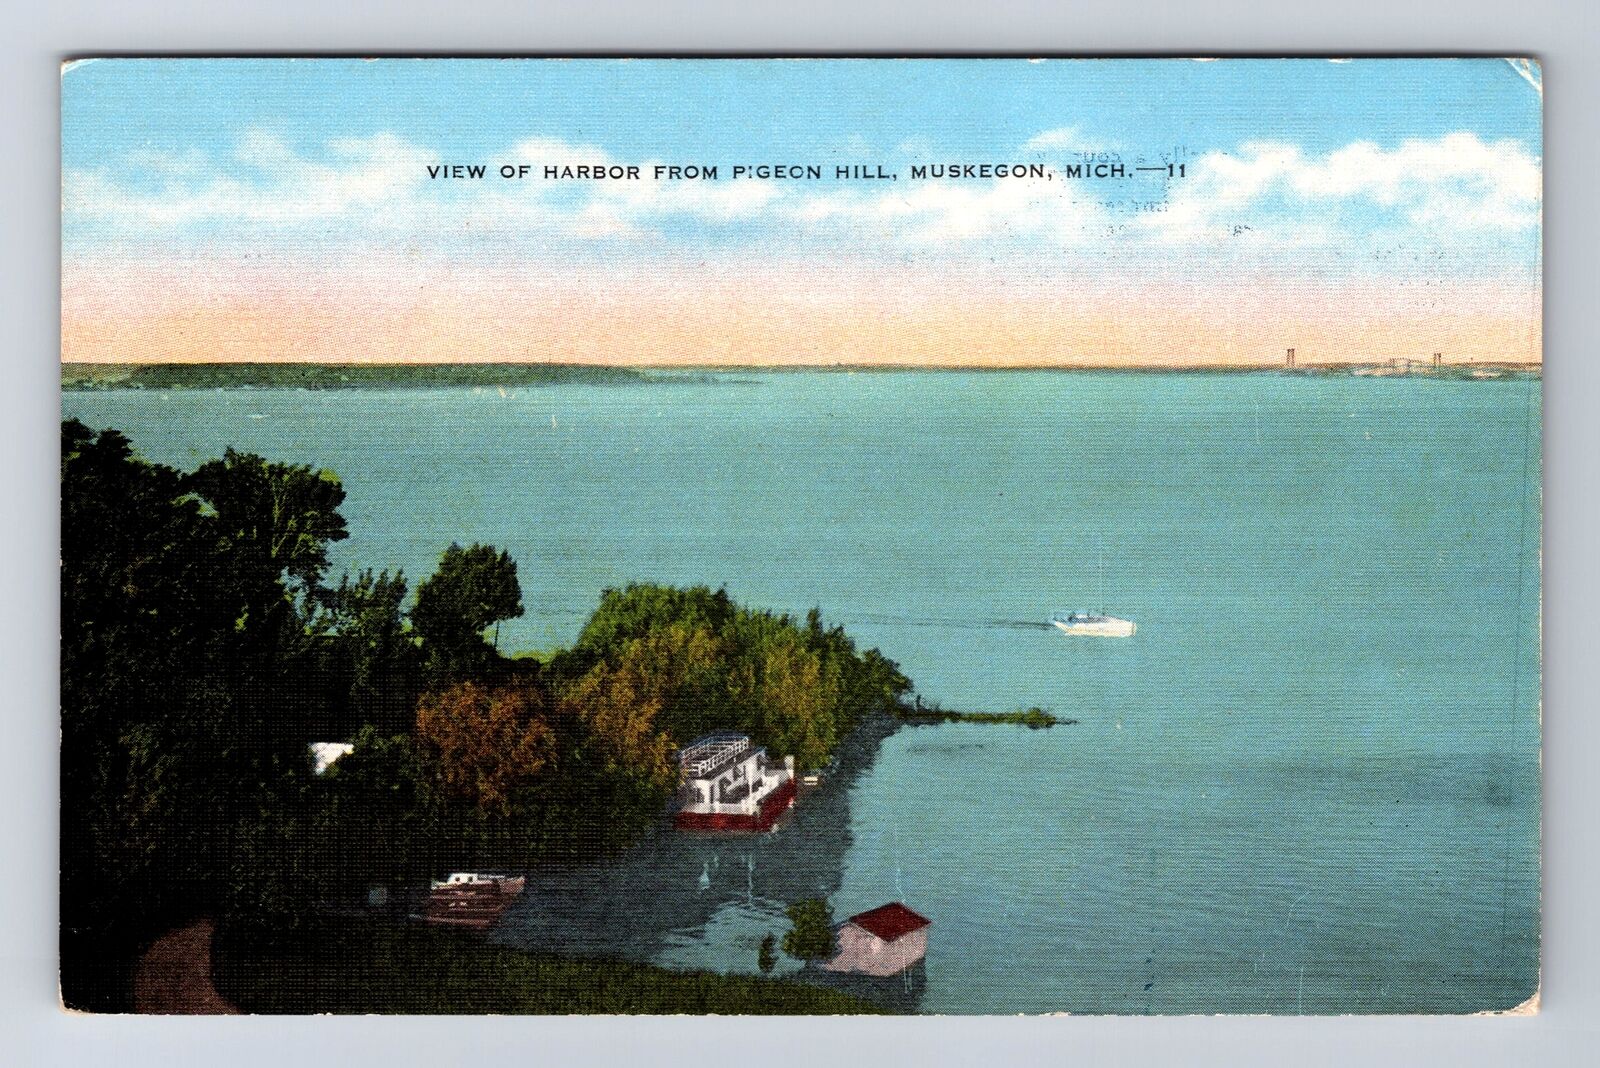 Muskegon MI-Michigan, View of Boating on Harbor at Pigeon Hill Vintage Postcard